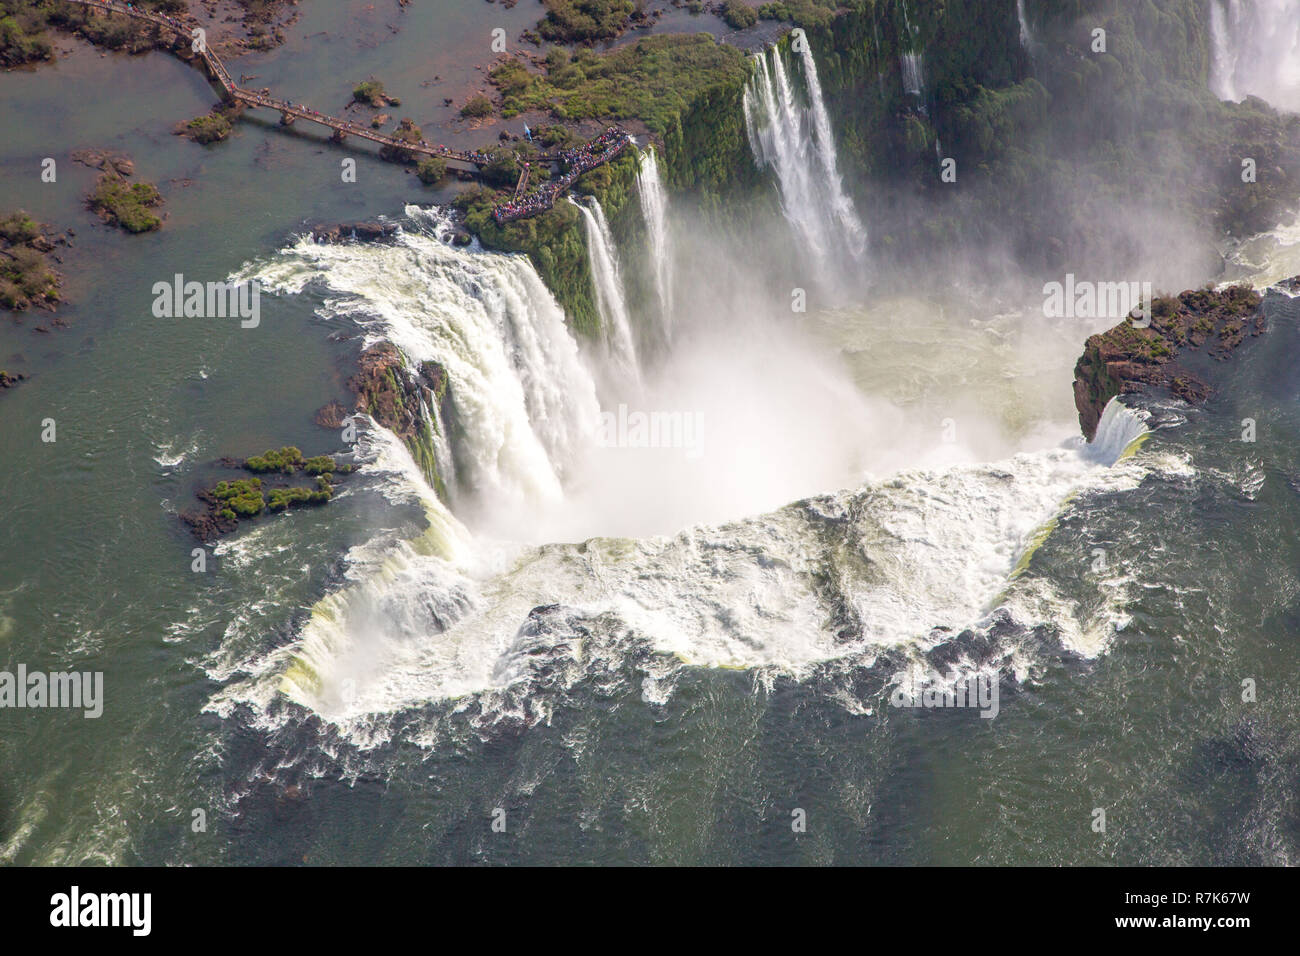 Aerial view of beautiful Iguazu Falls Devil's Throat chasm from a helicopter flight. Brazil and Argentina. South America. Latin America. Stock Photo